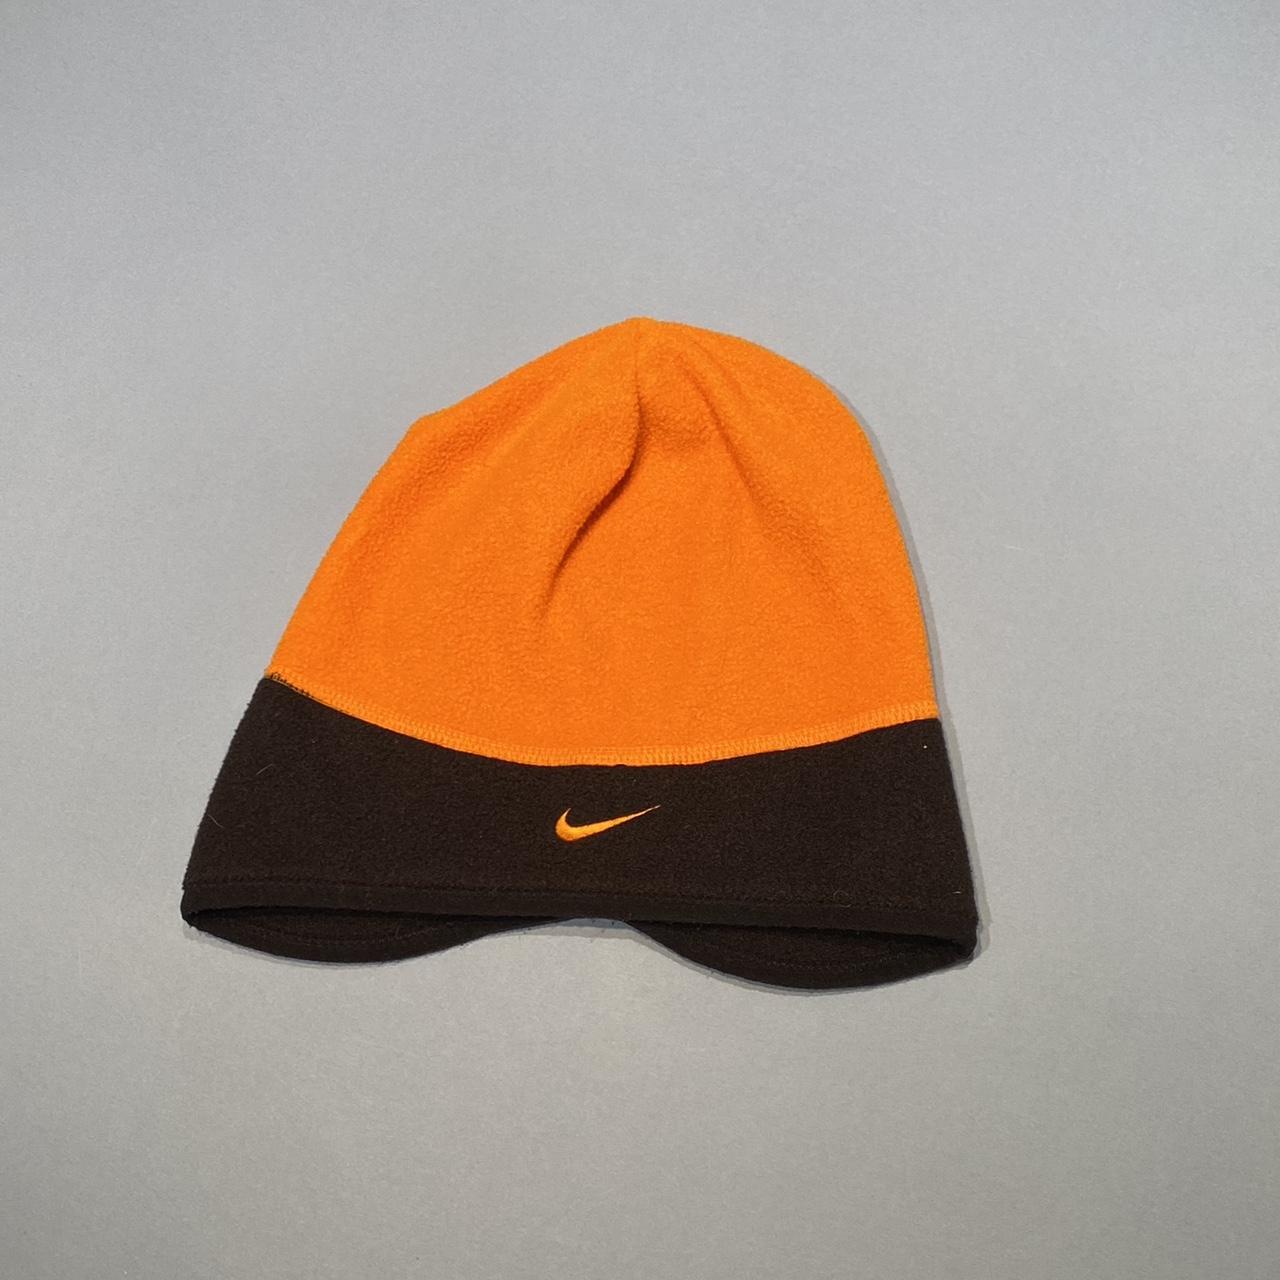 Nike Fit Beanie! Size fits all and is super... -